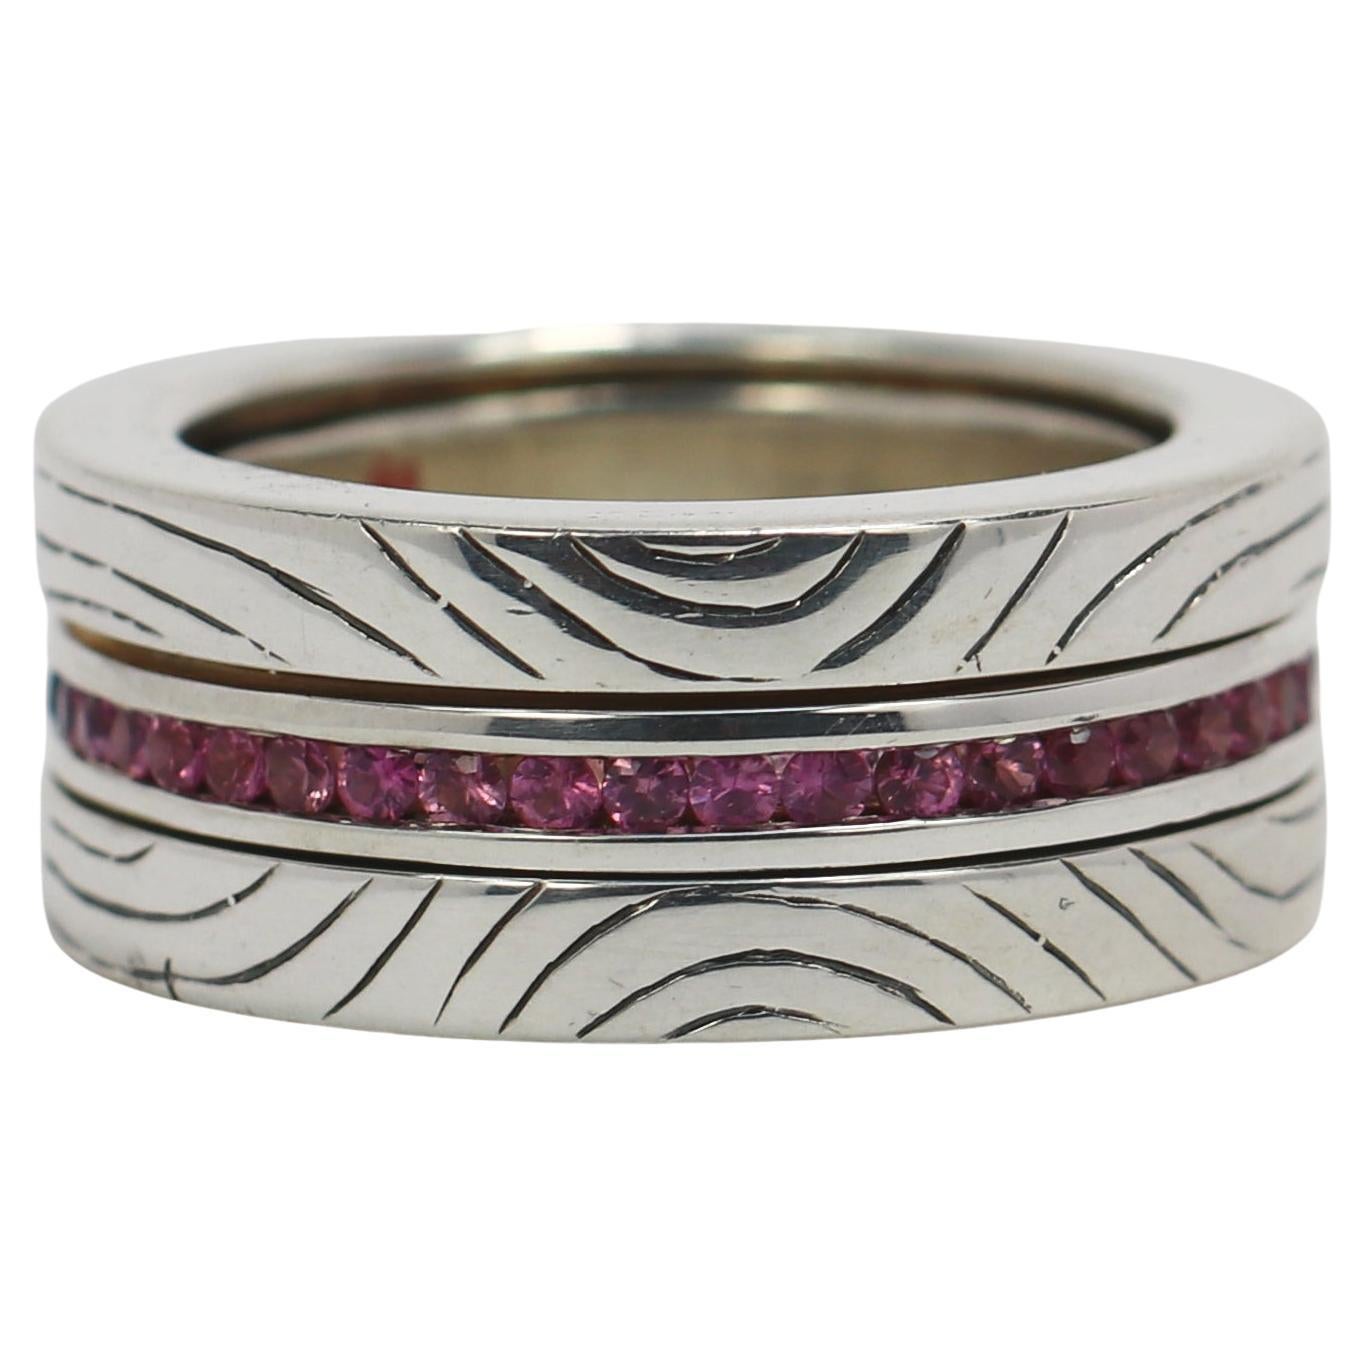 Fashioned by hand in sterling silver this 3/8-inch-wide ring has, at its center, a band of vivid blue and pink sapphires which rotates so as to add versatility to its great beauty. 
This impressive and most unusual ring fits a size 7 1/2 finger and